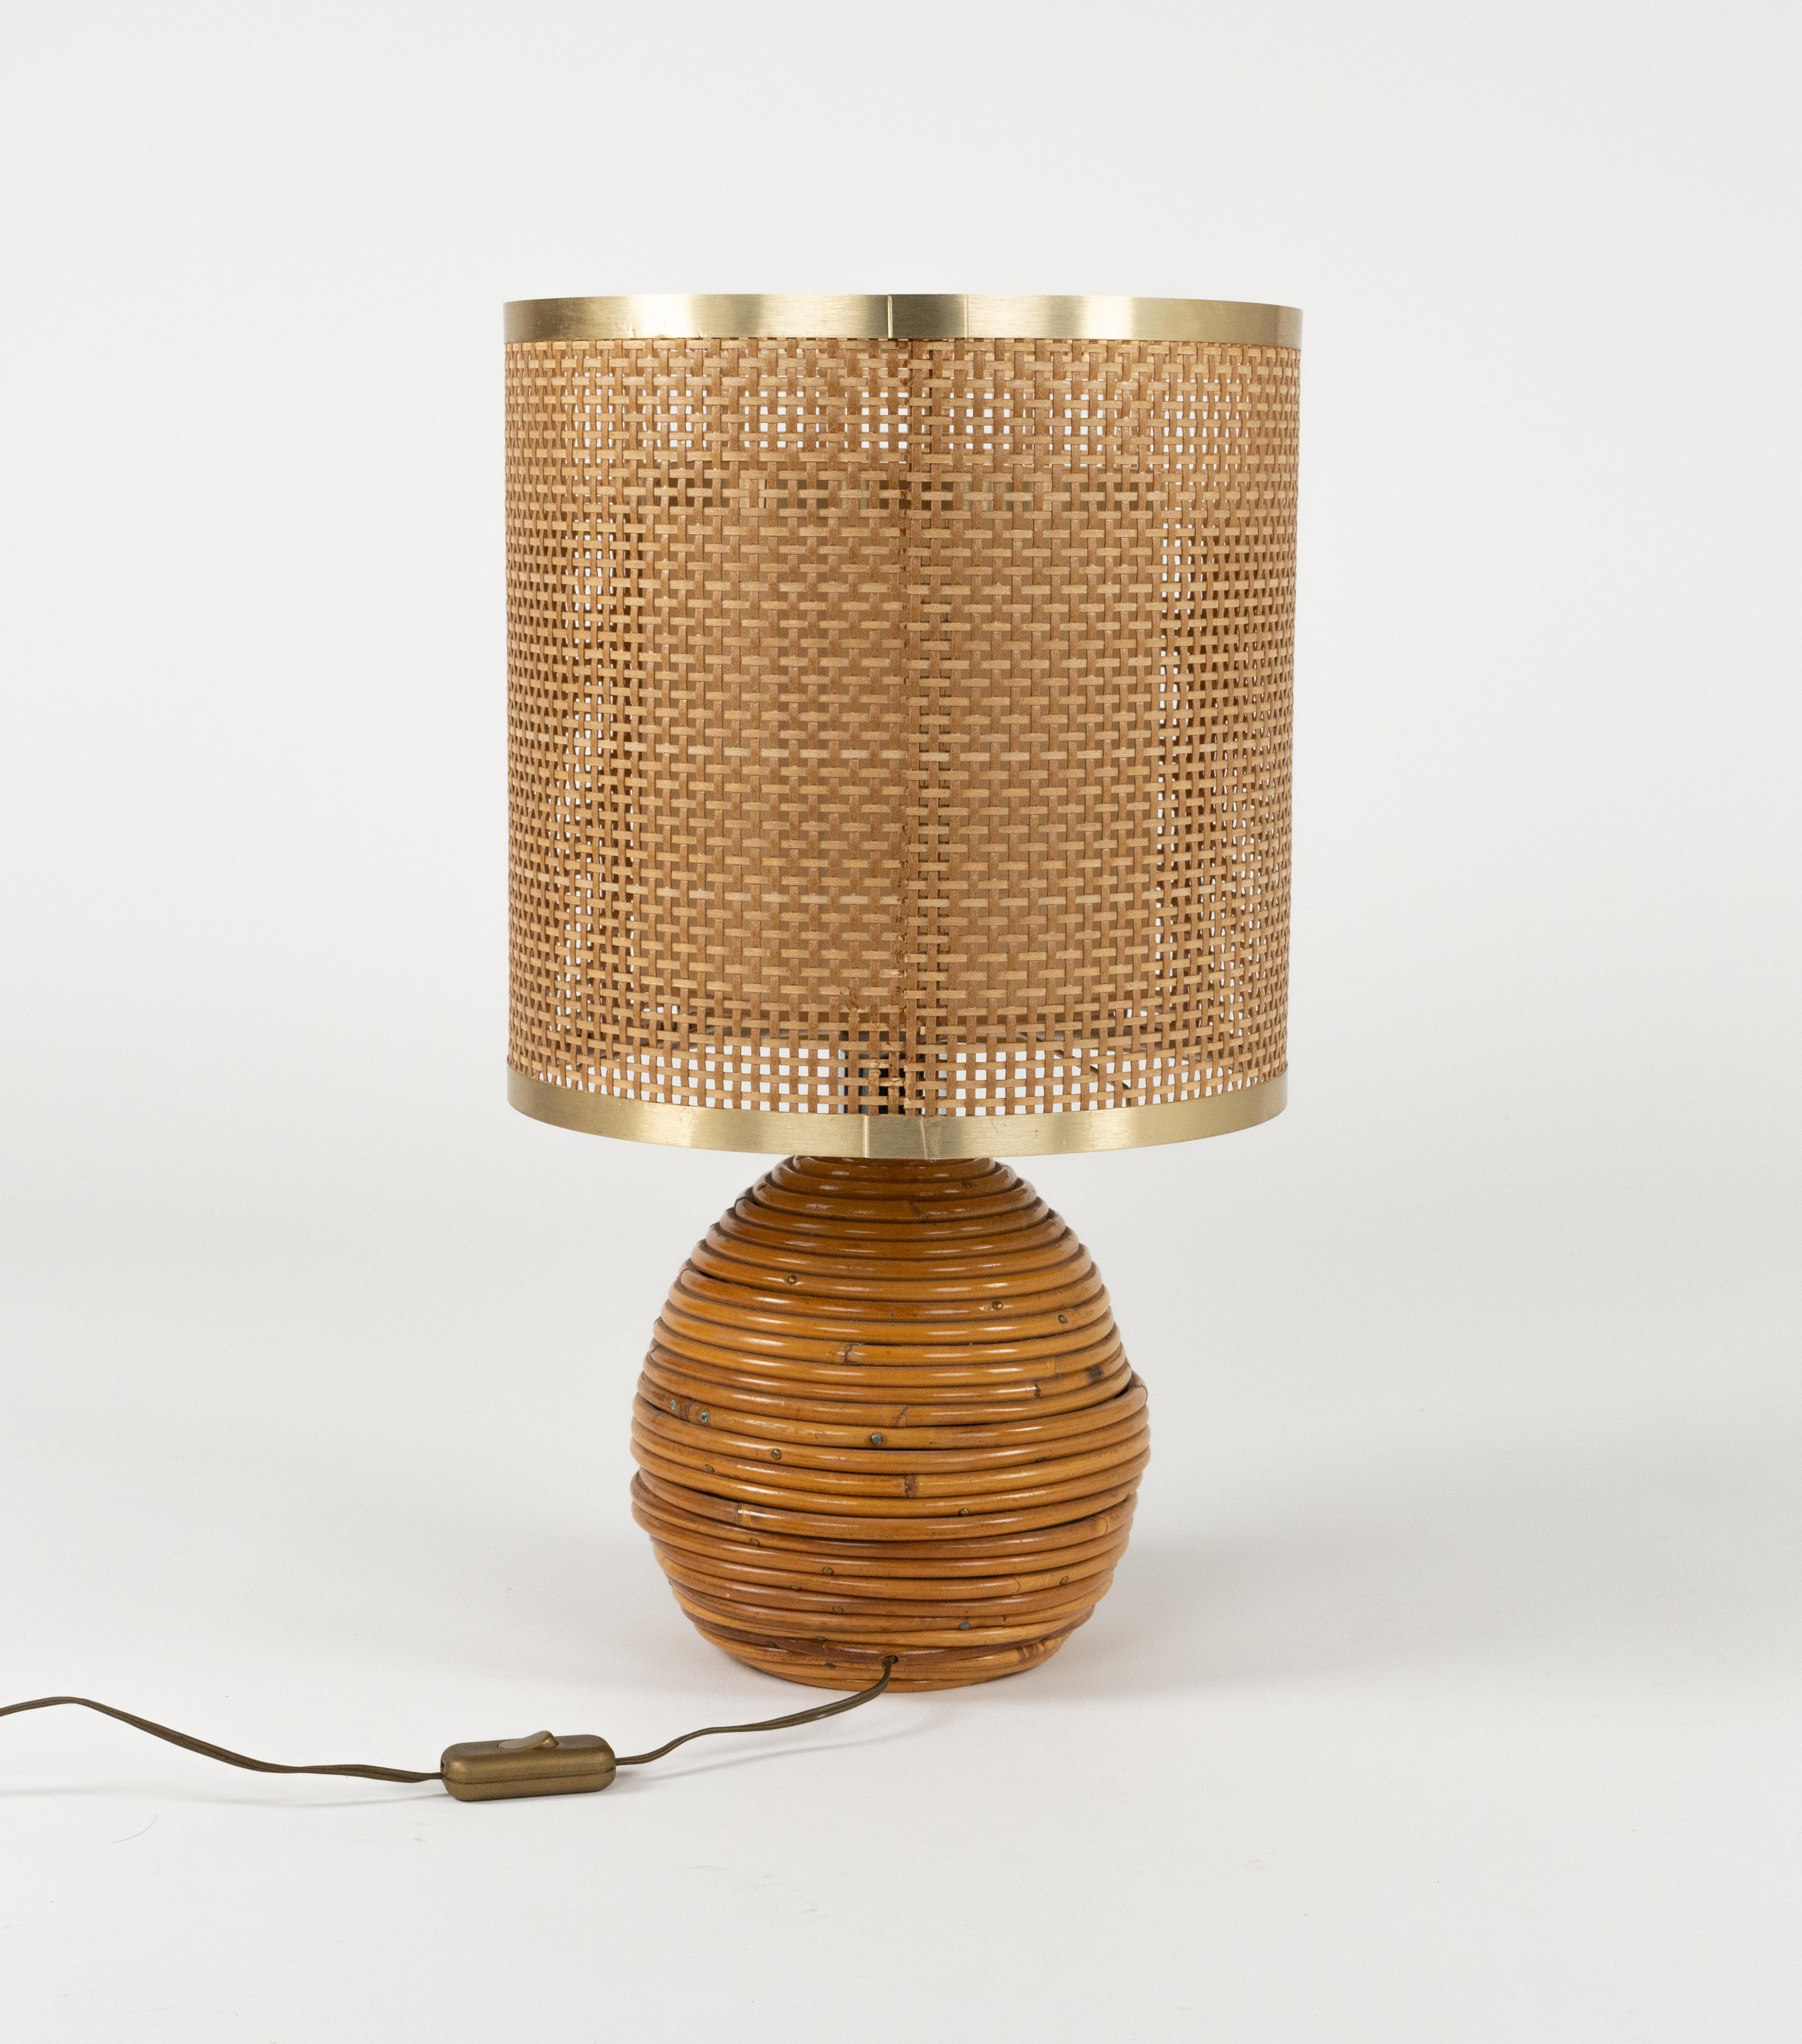 Midcentury Rattan, Wicker and Chrome Table Lamp by Vivai Del Sud, Italy 1970s For Sale 4